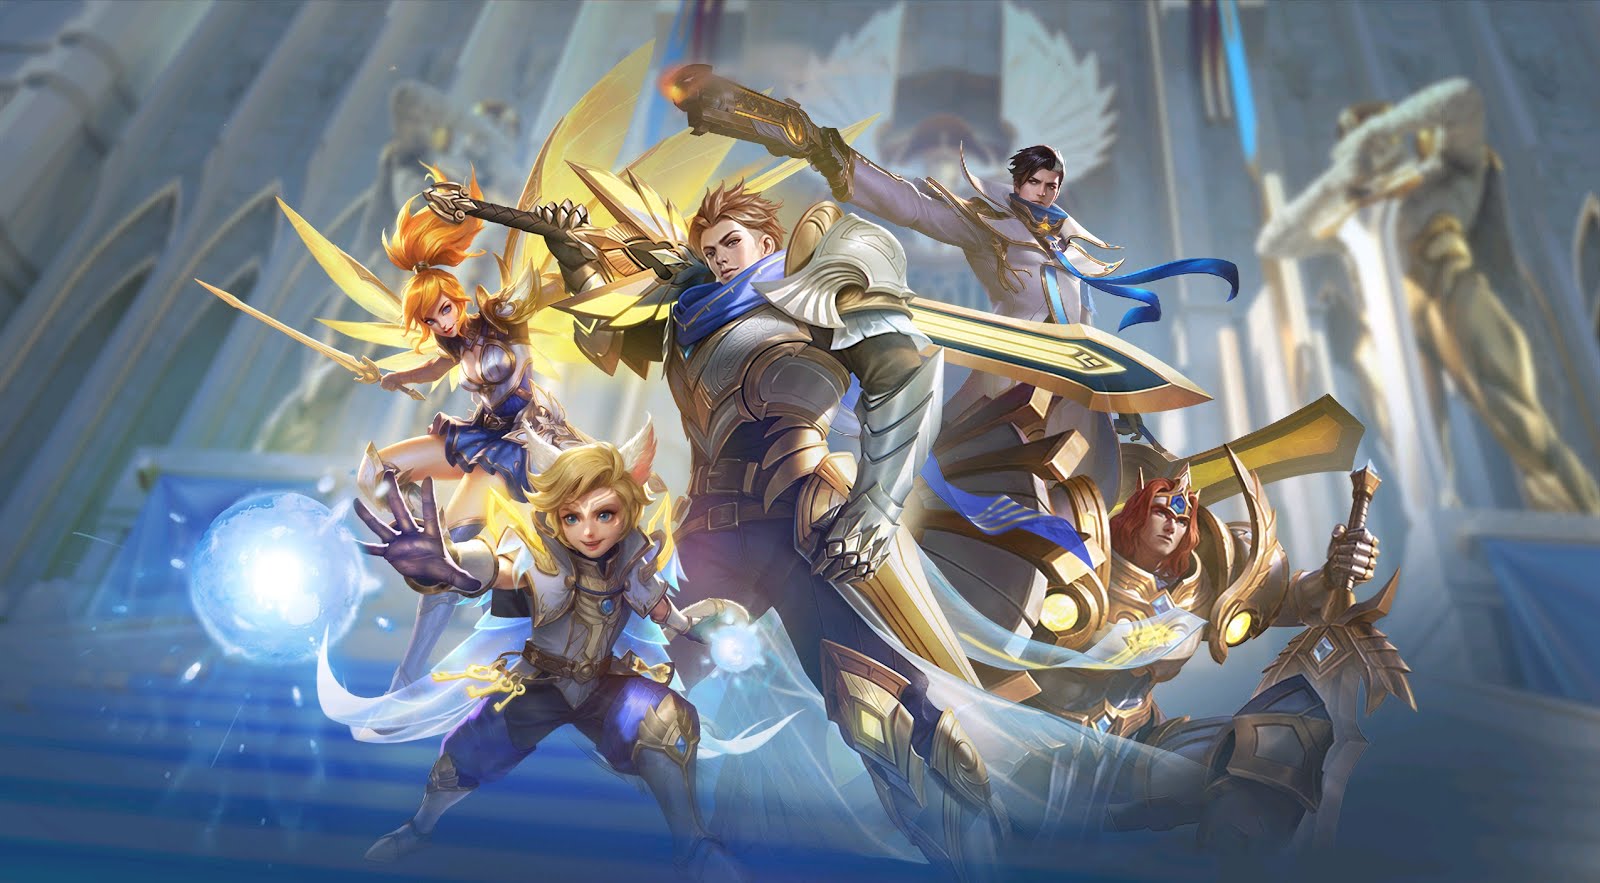  Mobile  Legends  Wallpapers  HD LIGHTBORN SQUAD  WALLPAPERS  HD